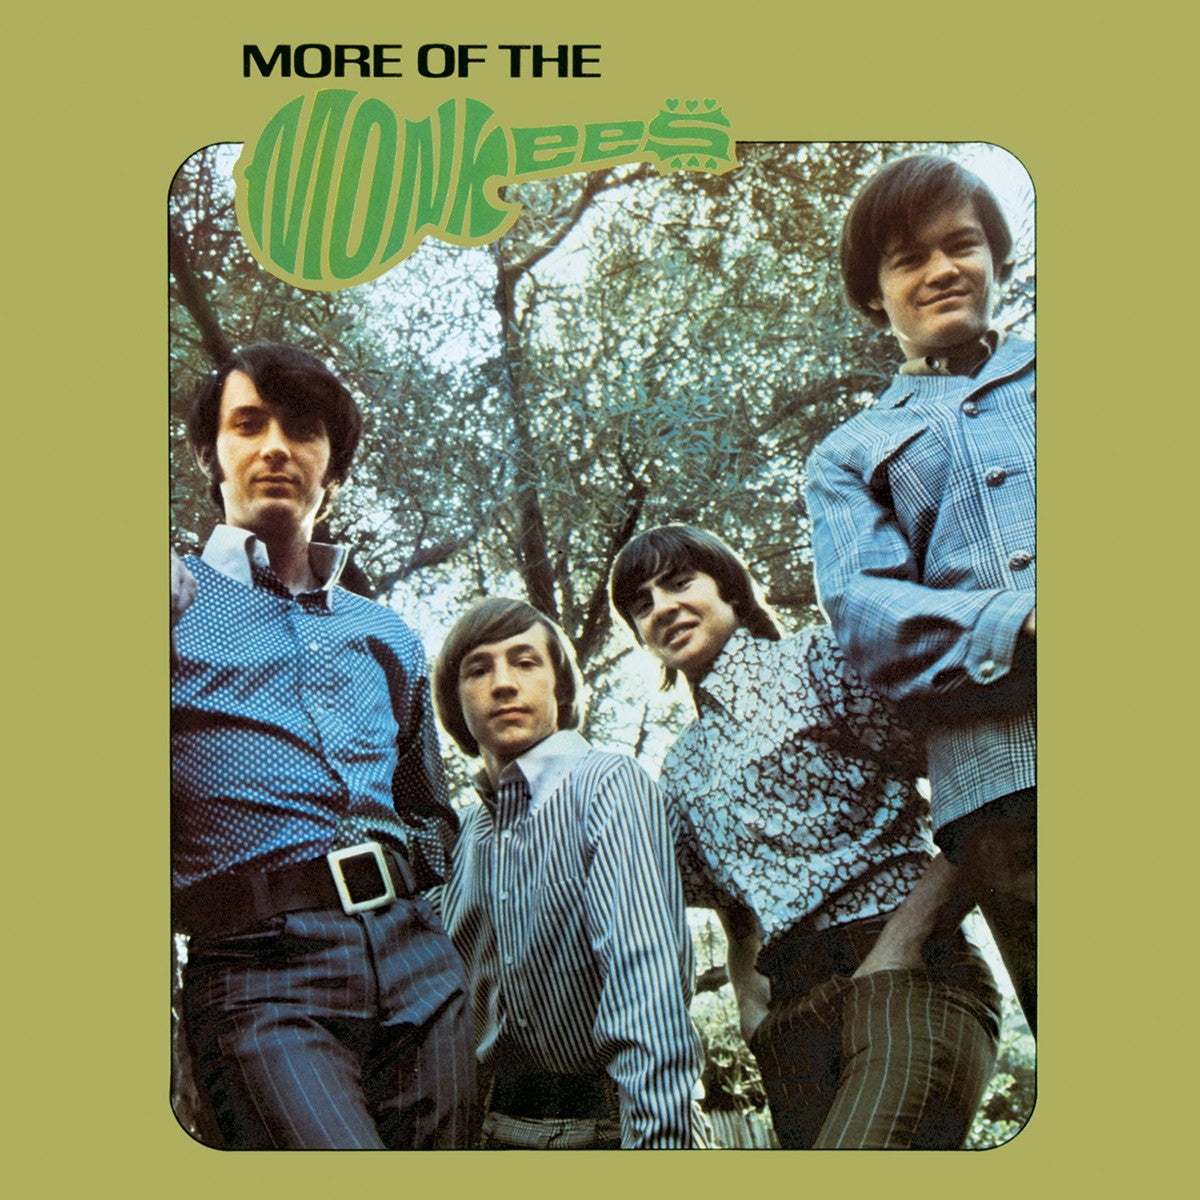 THE MONKEES - More Of The Monkees (Deluxe) - 2LP - 180g Vinyl